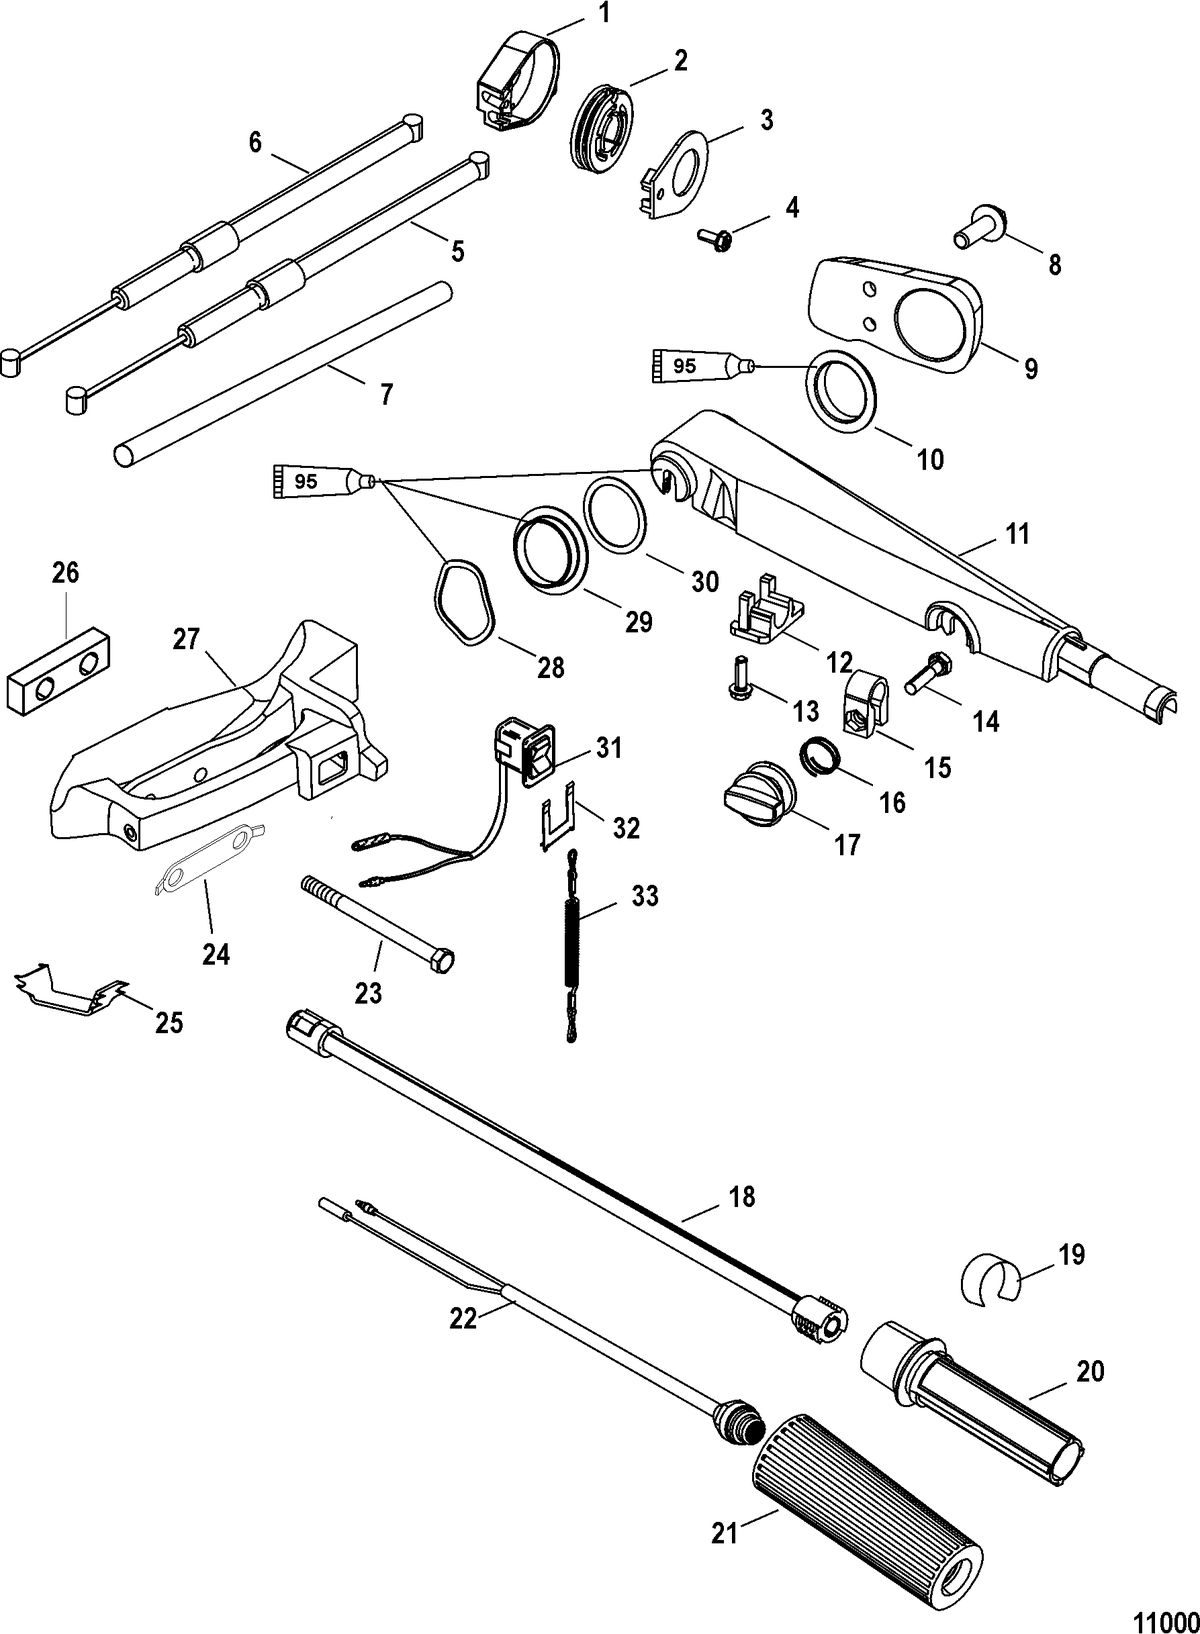 ACCESSORIES STEERING SYSTEMS AND COMPONENTS Tiller Handle Kit(828813A6 / A7 / A29)